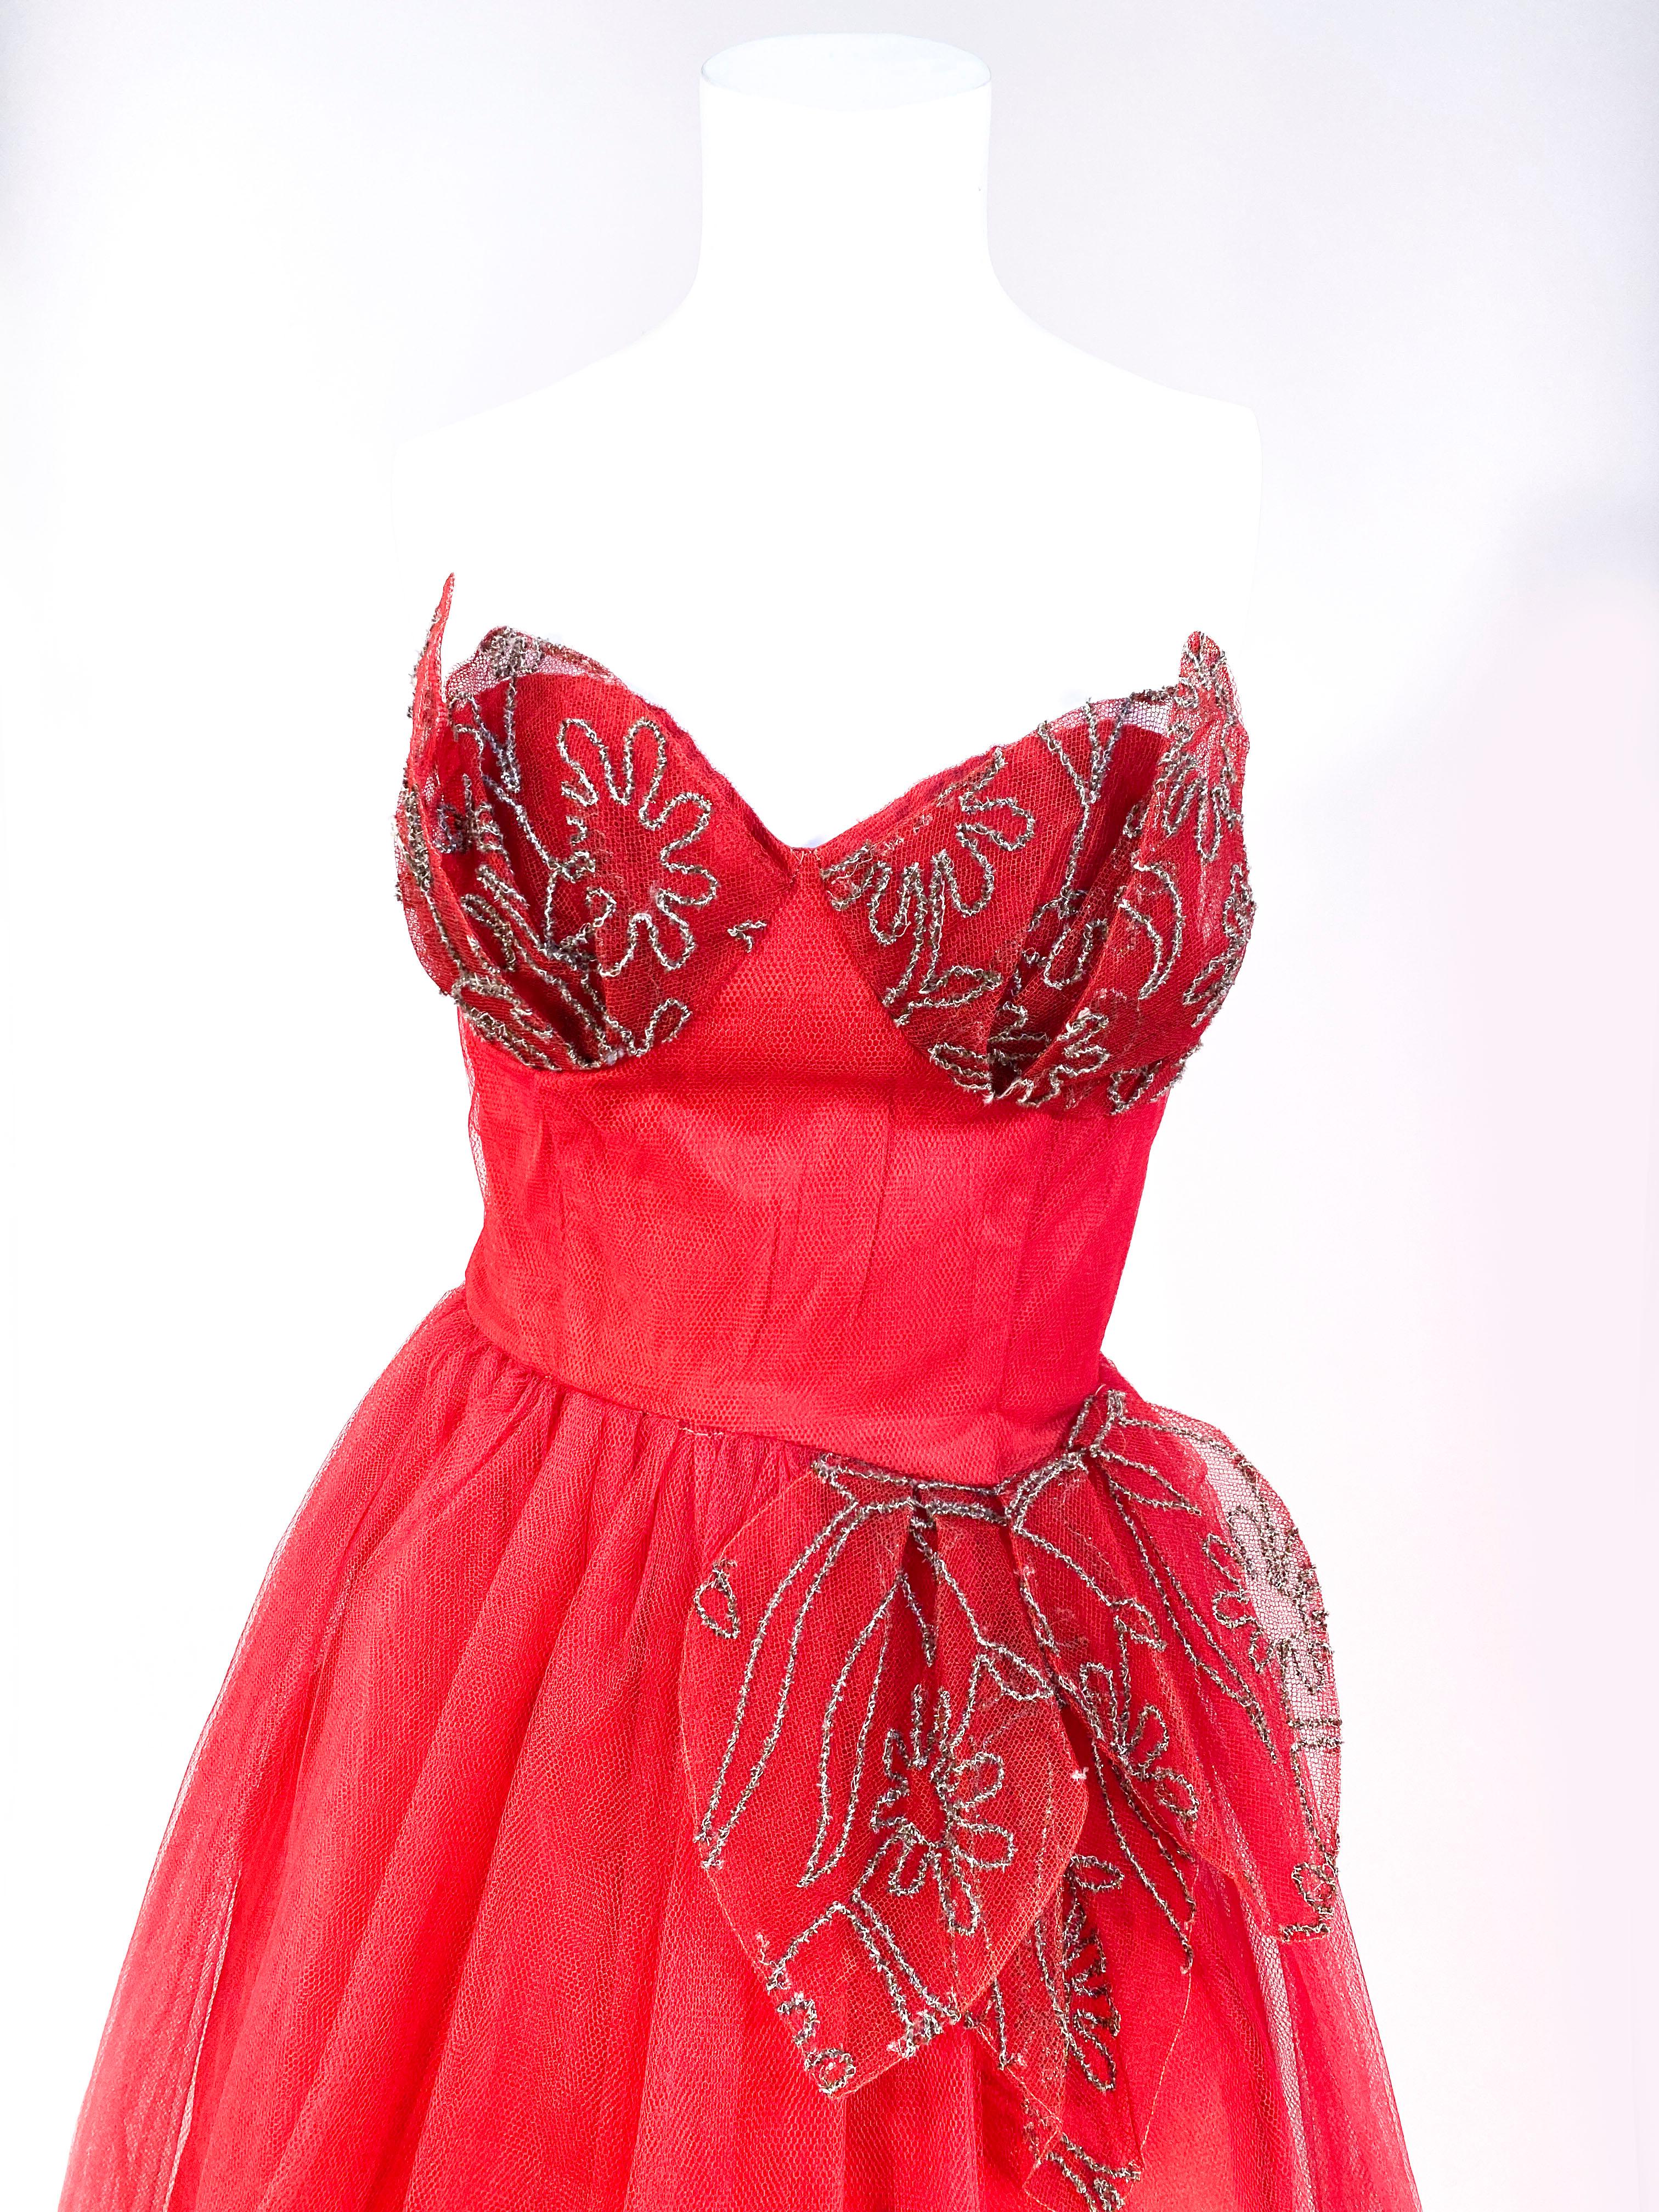 1950s red tulle tea-length party dress with decorative tulle petals with metallic broidery over the bust and adoring the waist. The dress is complete lined and the bodice is boned for structure. 